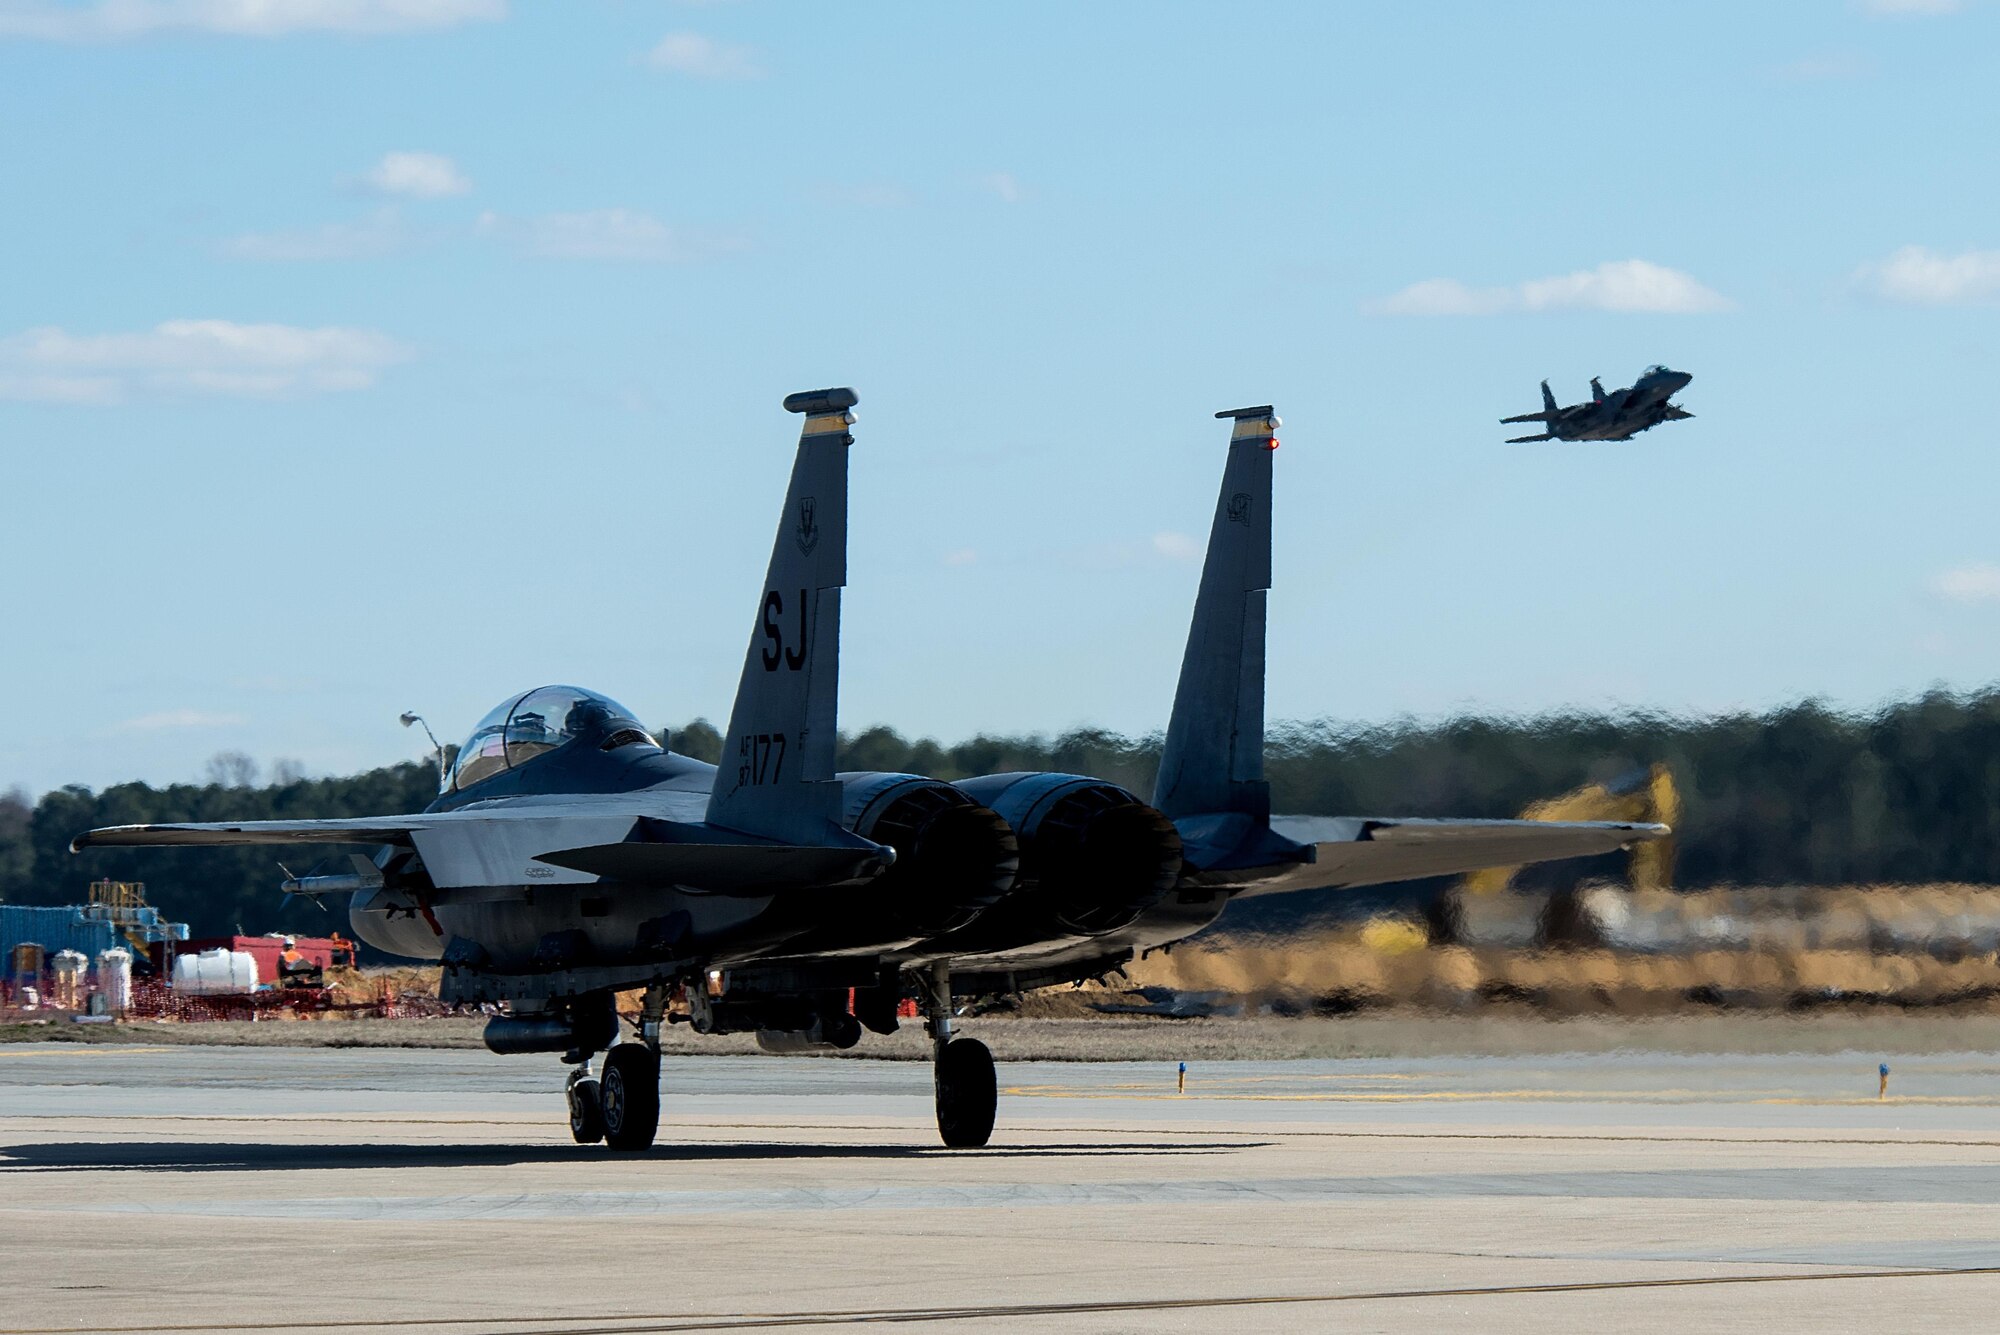 An F-15E Strike Eagle from the 336th Fighter Squadron taxies down the runway while another aircraft takes off during exercise Coronet Warrior 17-01, Jan. 30, 2017, at Seymour Johnson Air Force Base, North Carolina. The exercise is designed to test the 4th Fighter Wing’s ability to operate in an overseas hostile location. (U.S. Air Force photo by Airman Shawna L. Keyes)